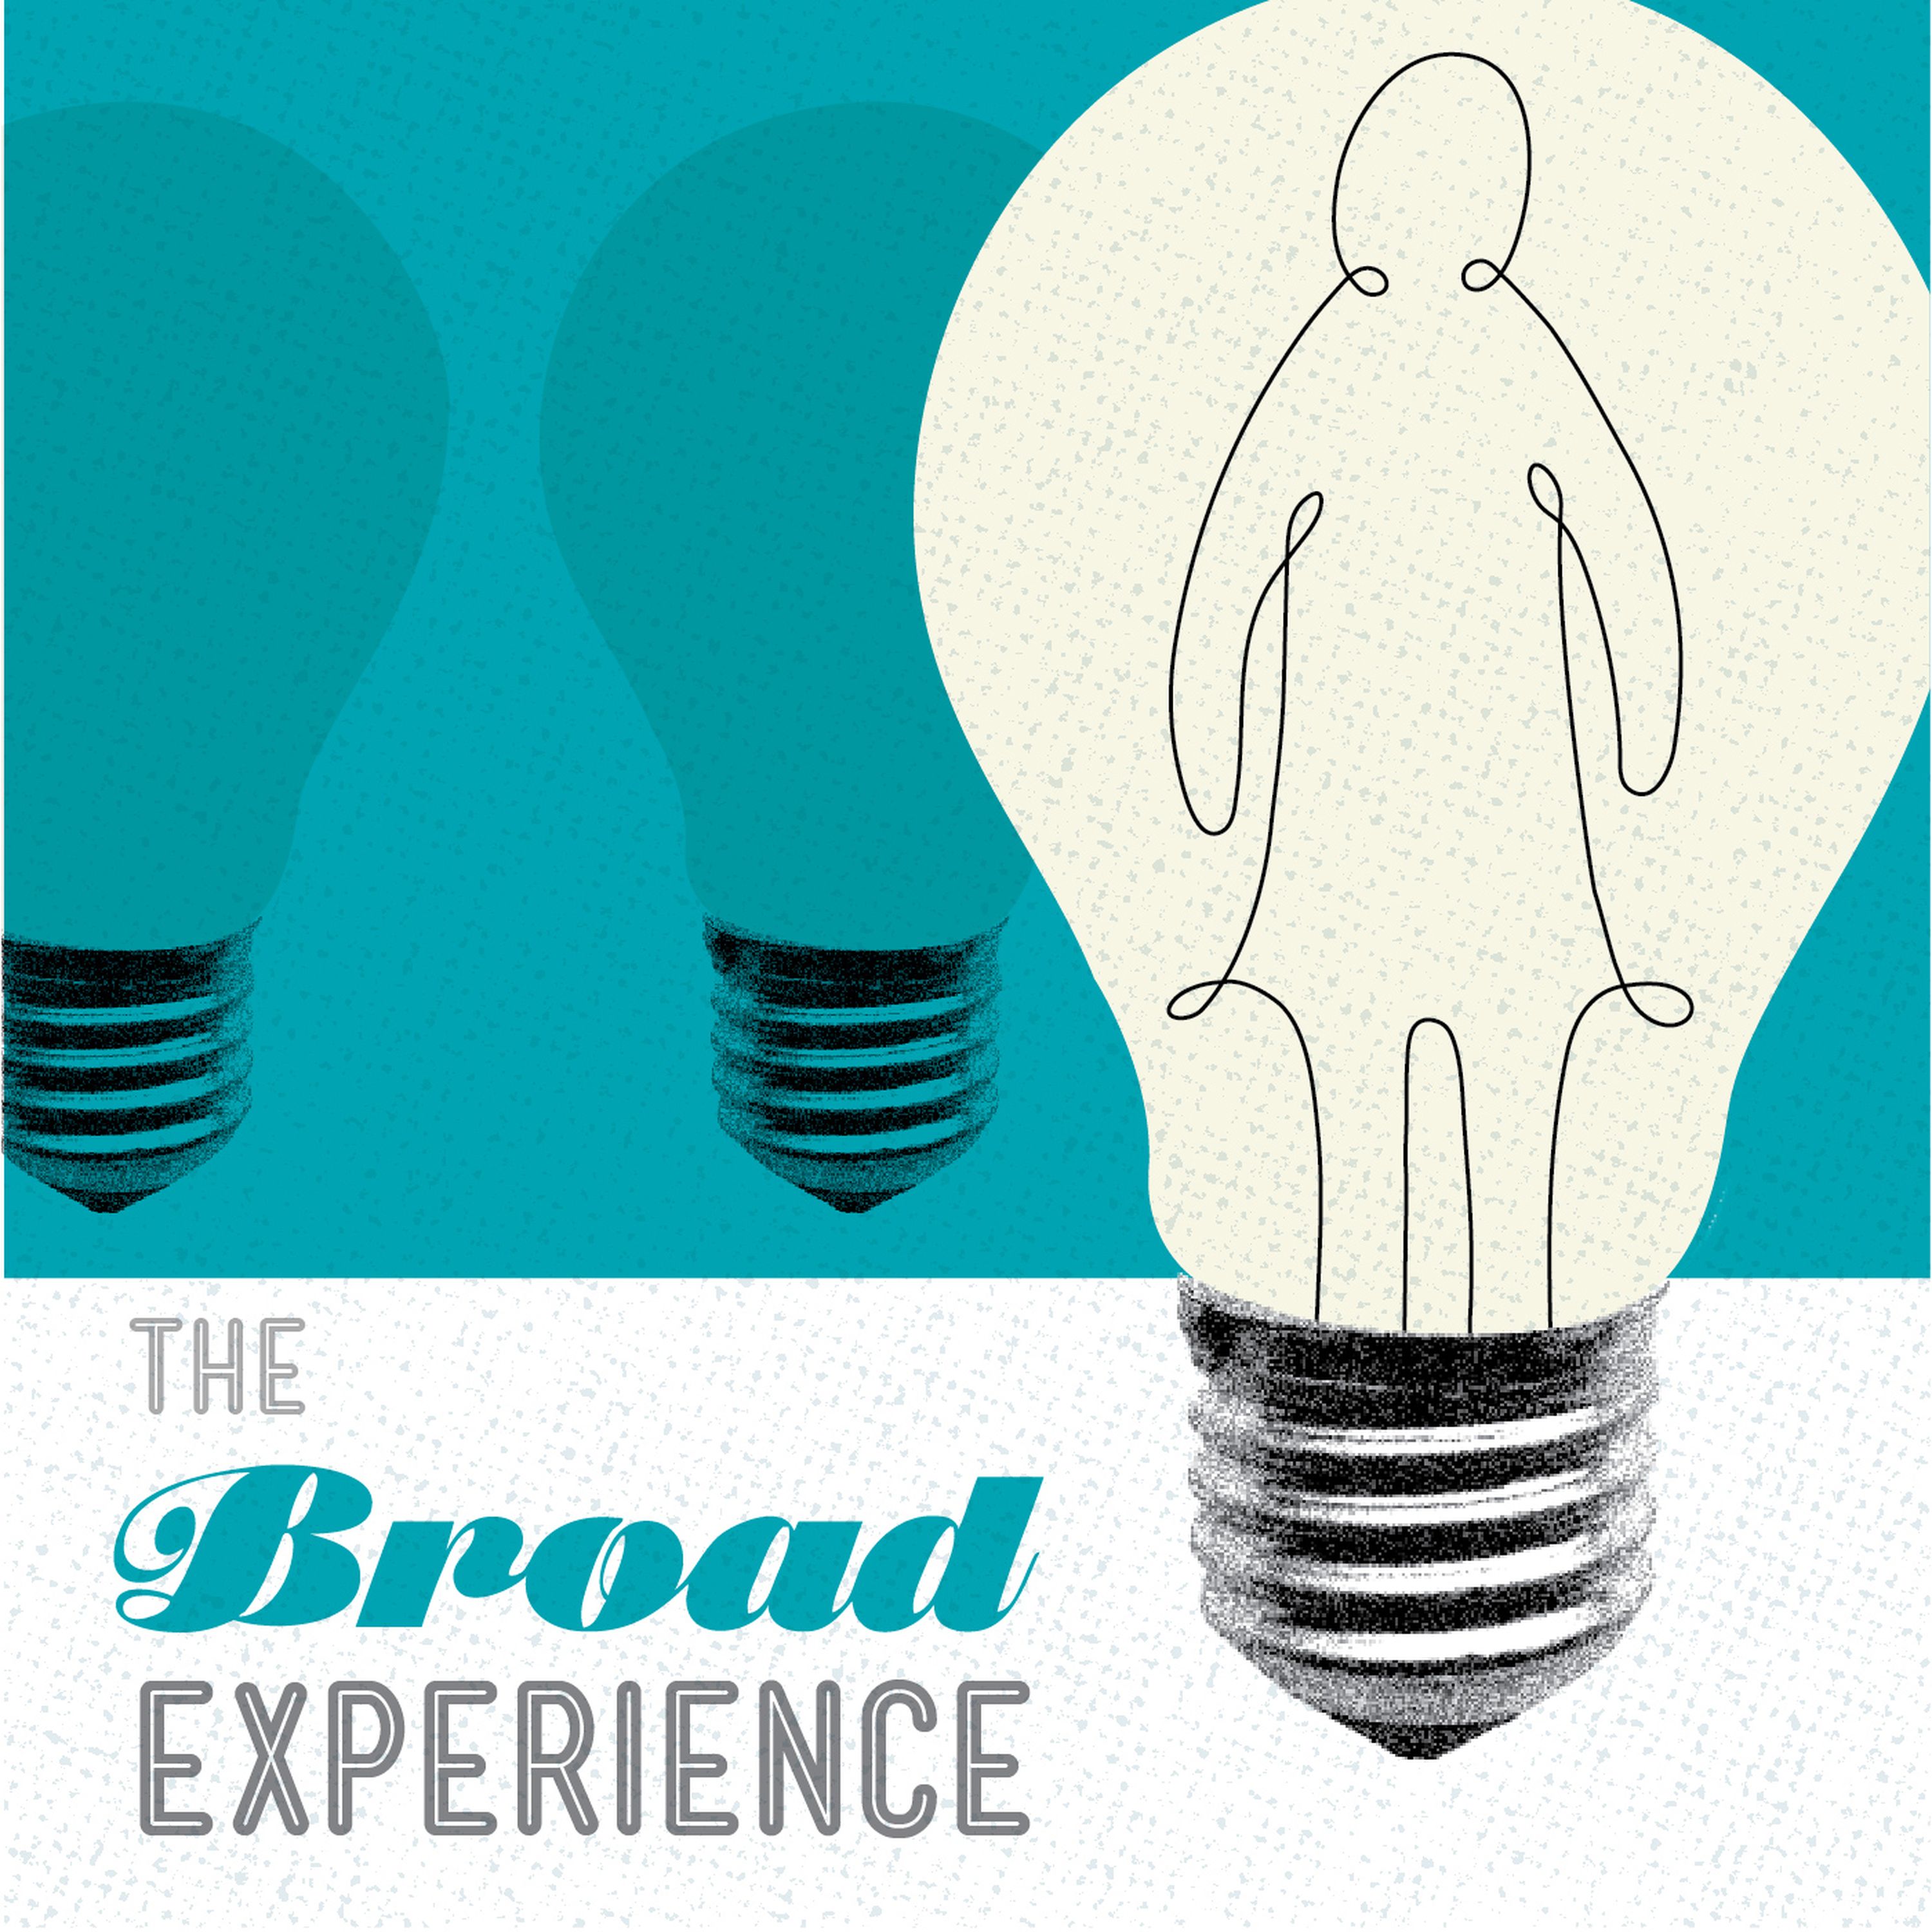 The Broad Experience 34:  Make them laugh - women, men, and humor at the office